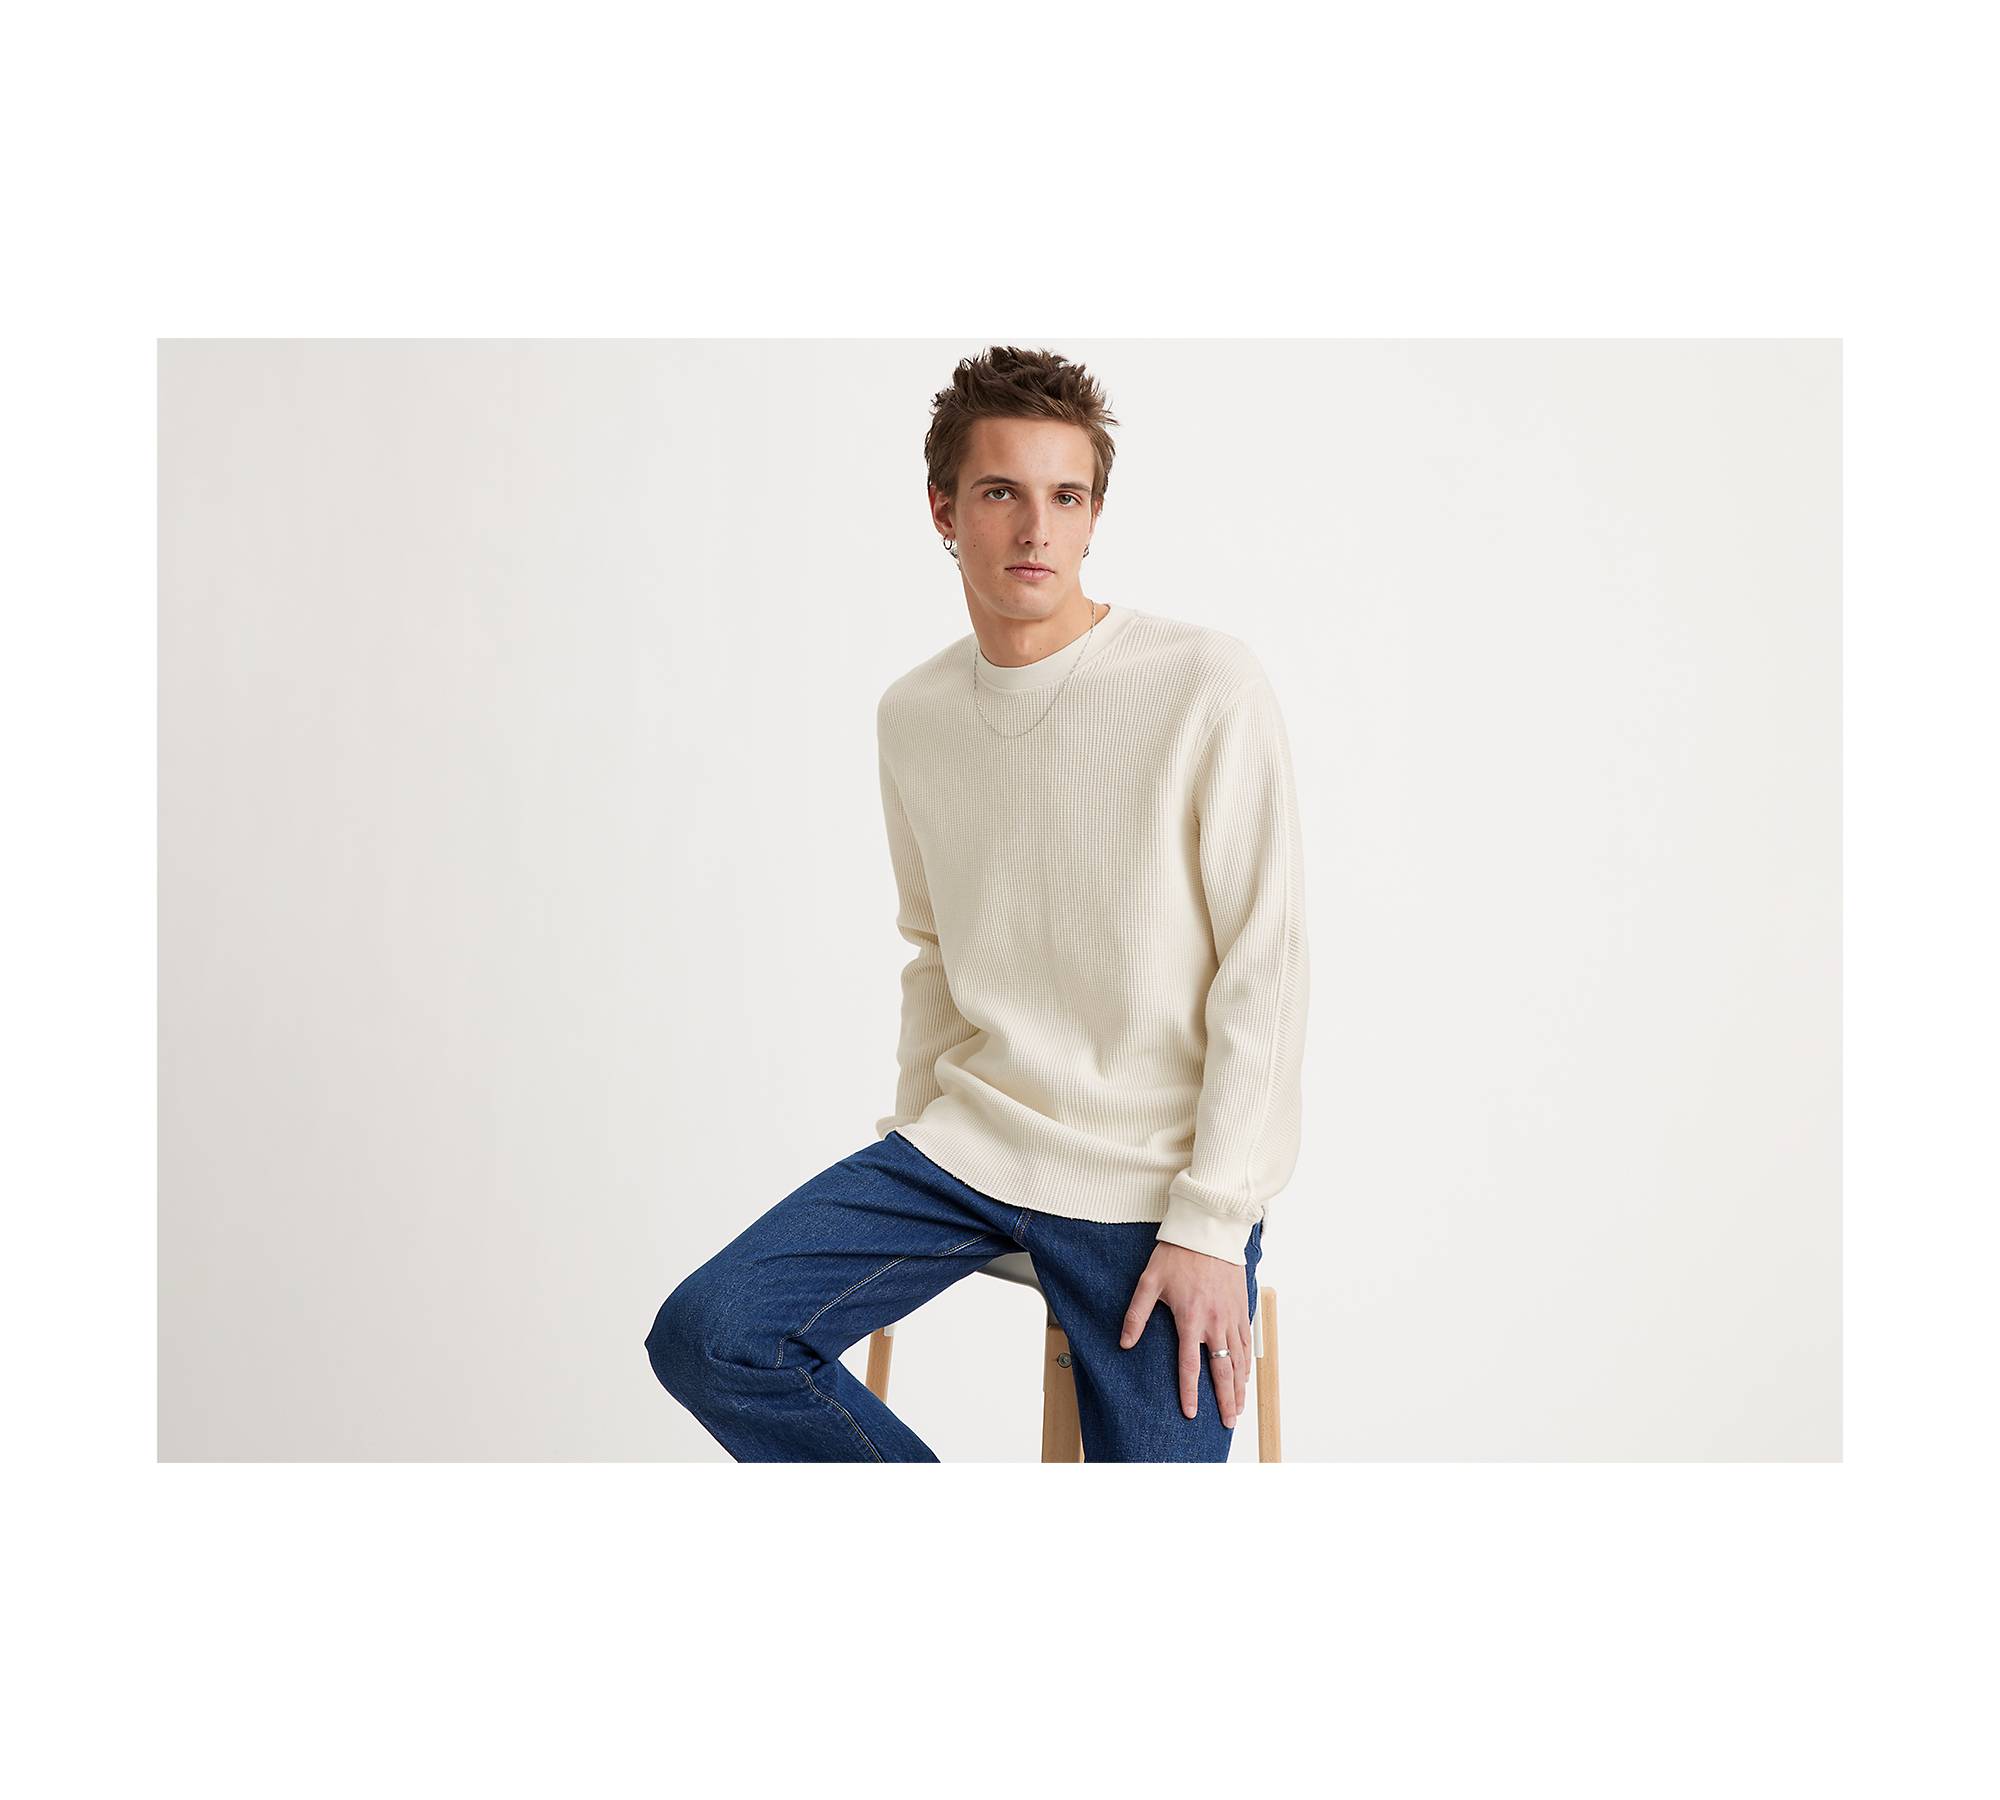 Long Sleeve Relaxed Fit Thermal Shirt - White